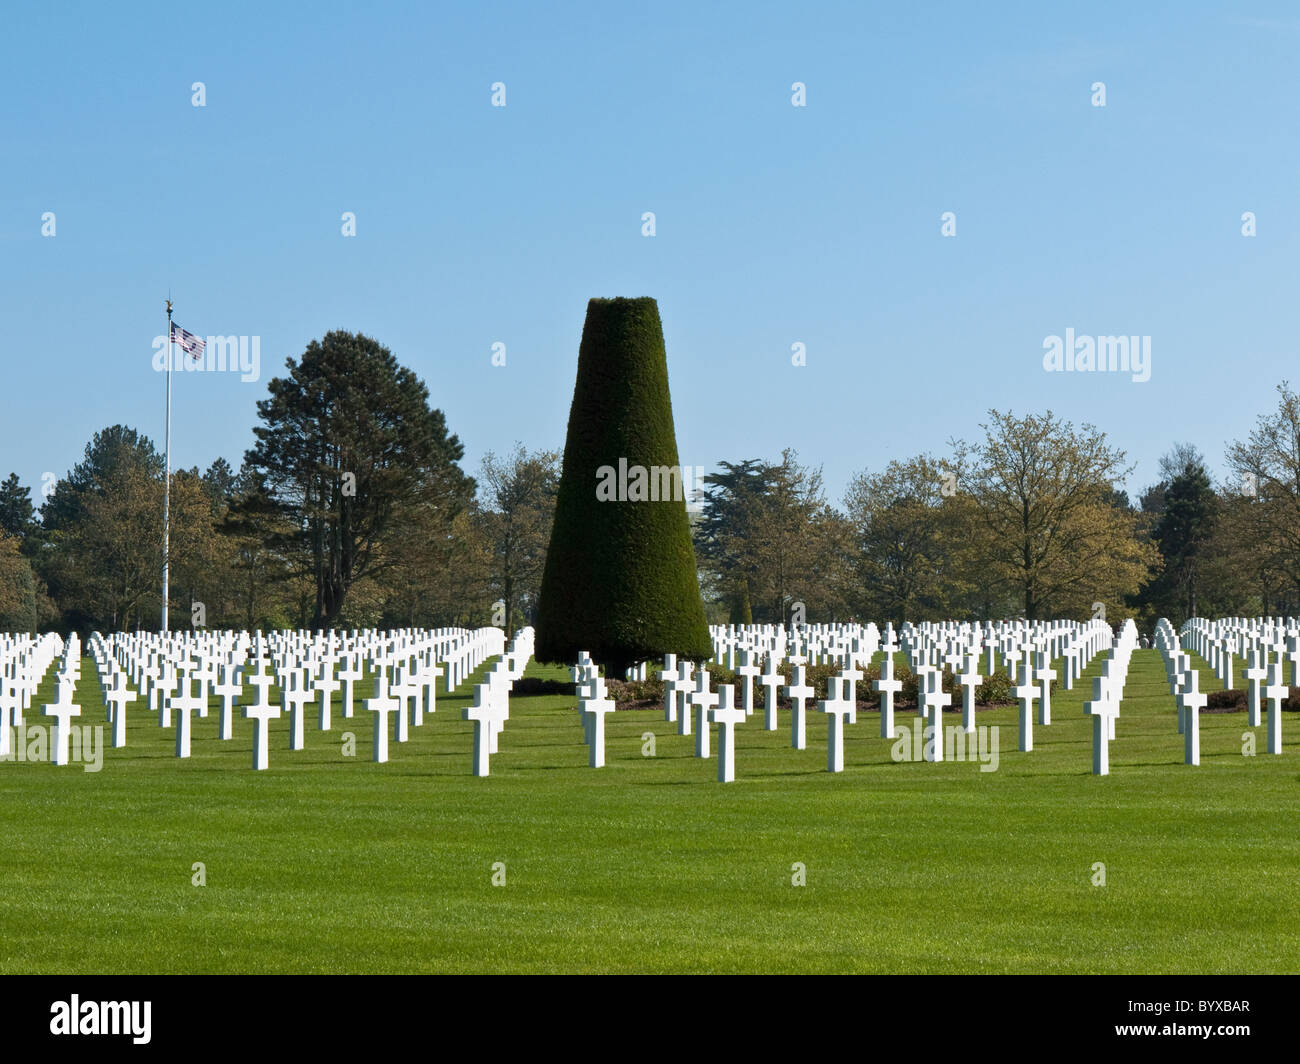 Rows of graves at the American War Cemetery, Omaha Beach in Normandy, France Stock Photo